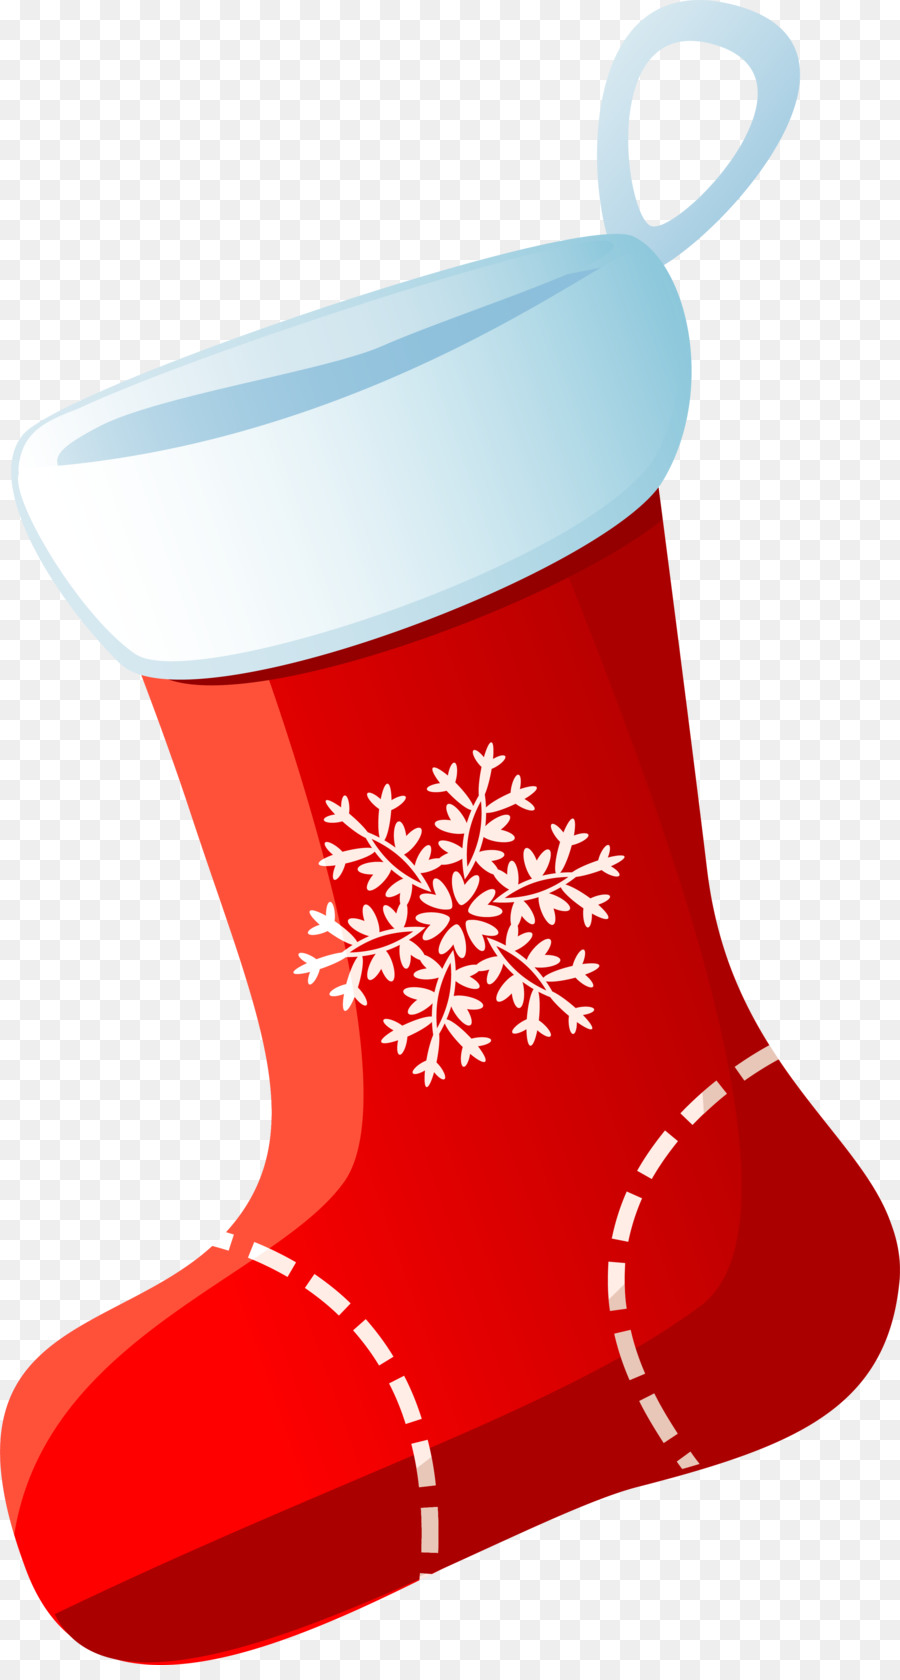 Christmas stocking Sock - Christmas red socks png download - 3001*5552 - Free Transparent Christmas Stockings png Download.